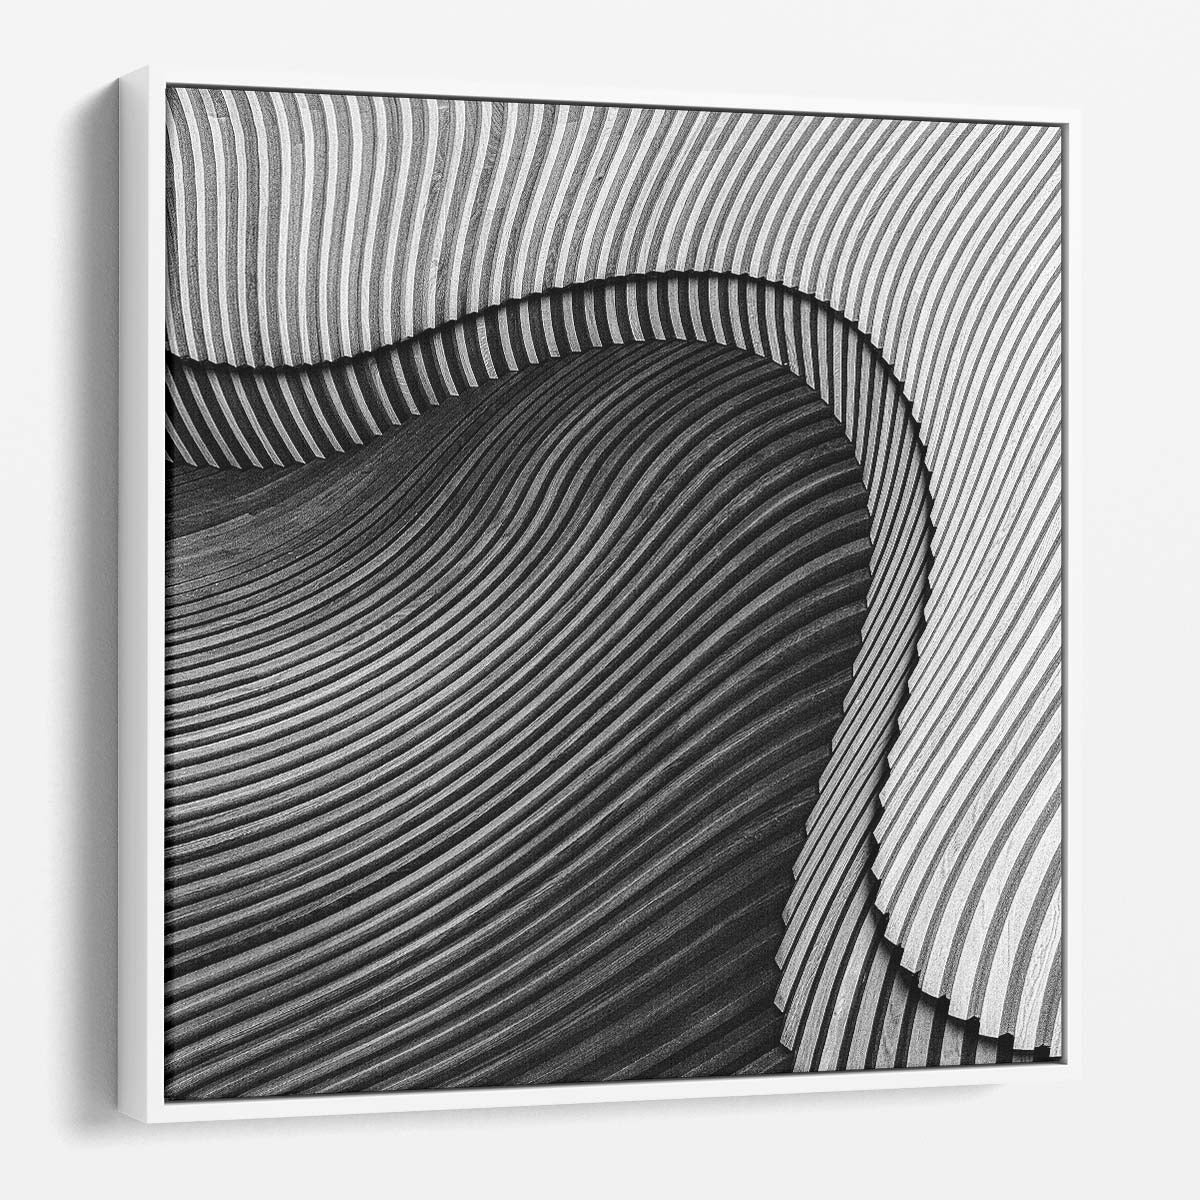 Abstract Monochrome Waves Curved Wood Photography Wall Art by Luxuriance Designs. Made in USA.